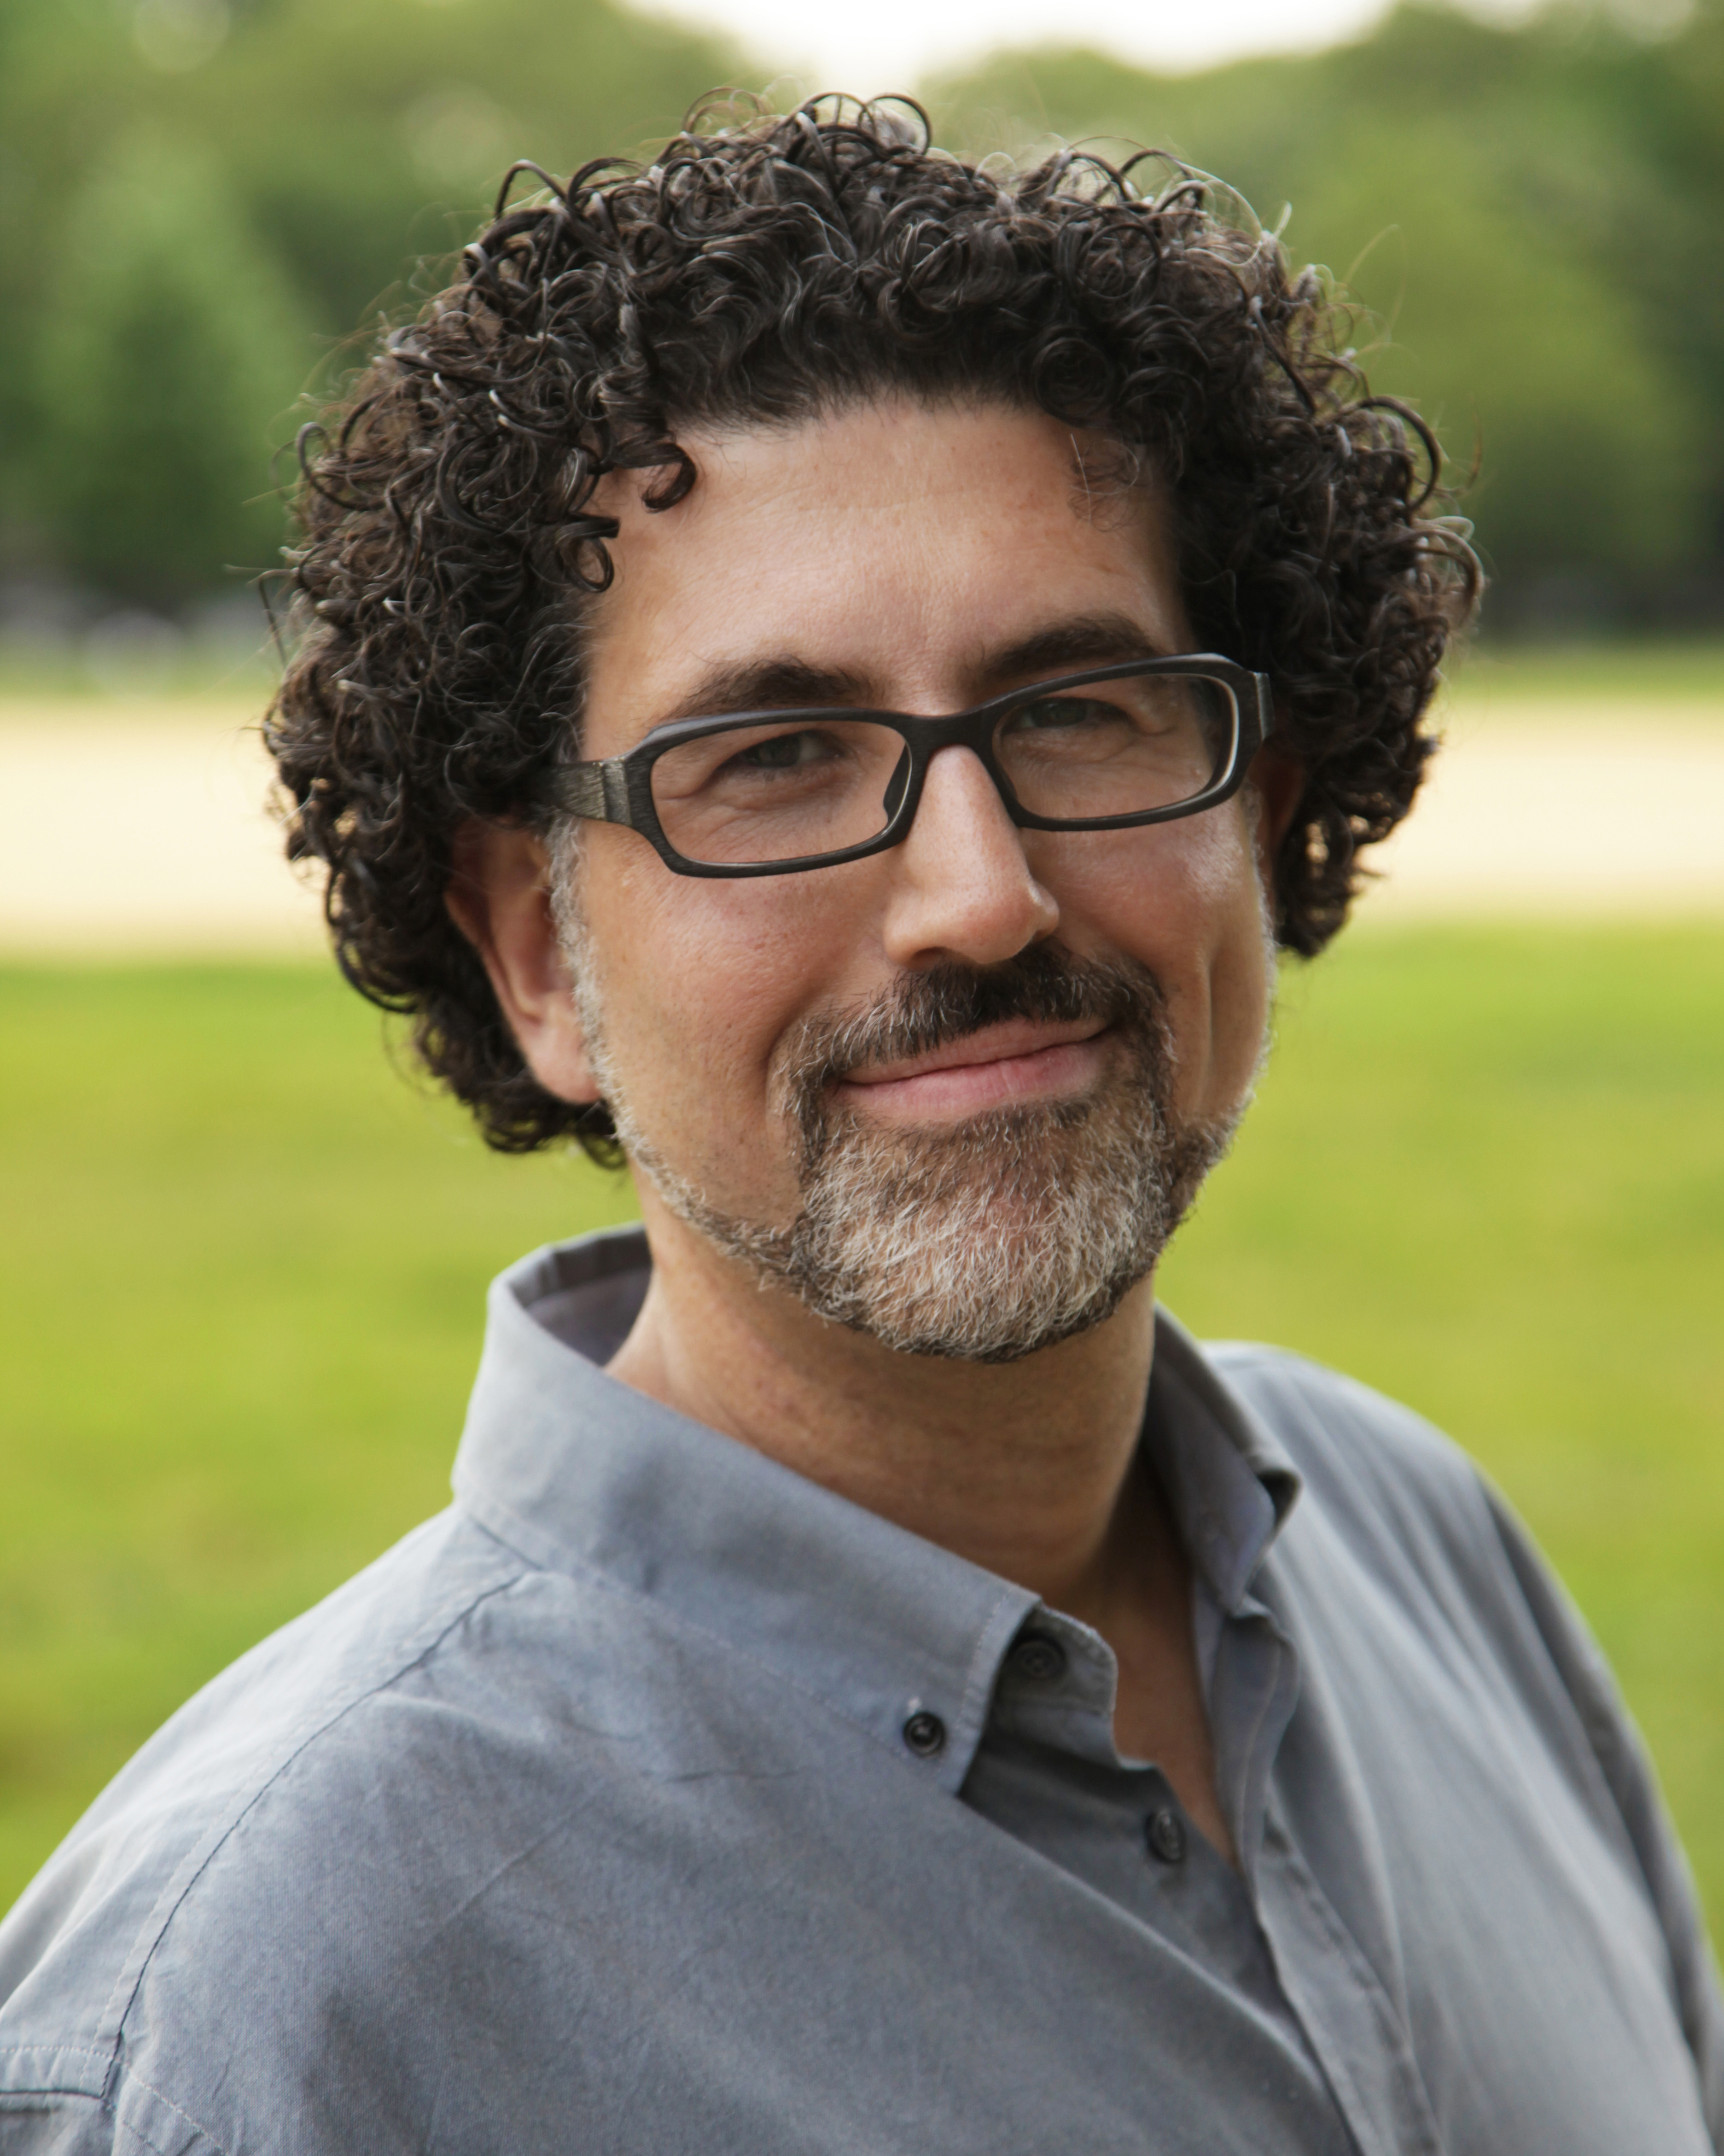 An outdoor photograph of Hrag Vartanian, Co-Founder and Editor-in-Chief of Hyperallergic